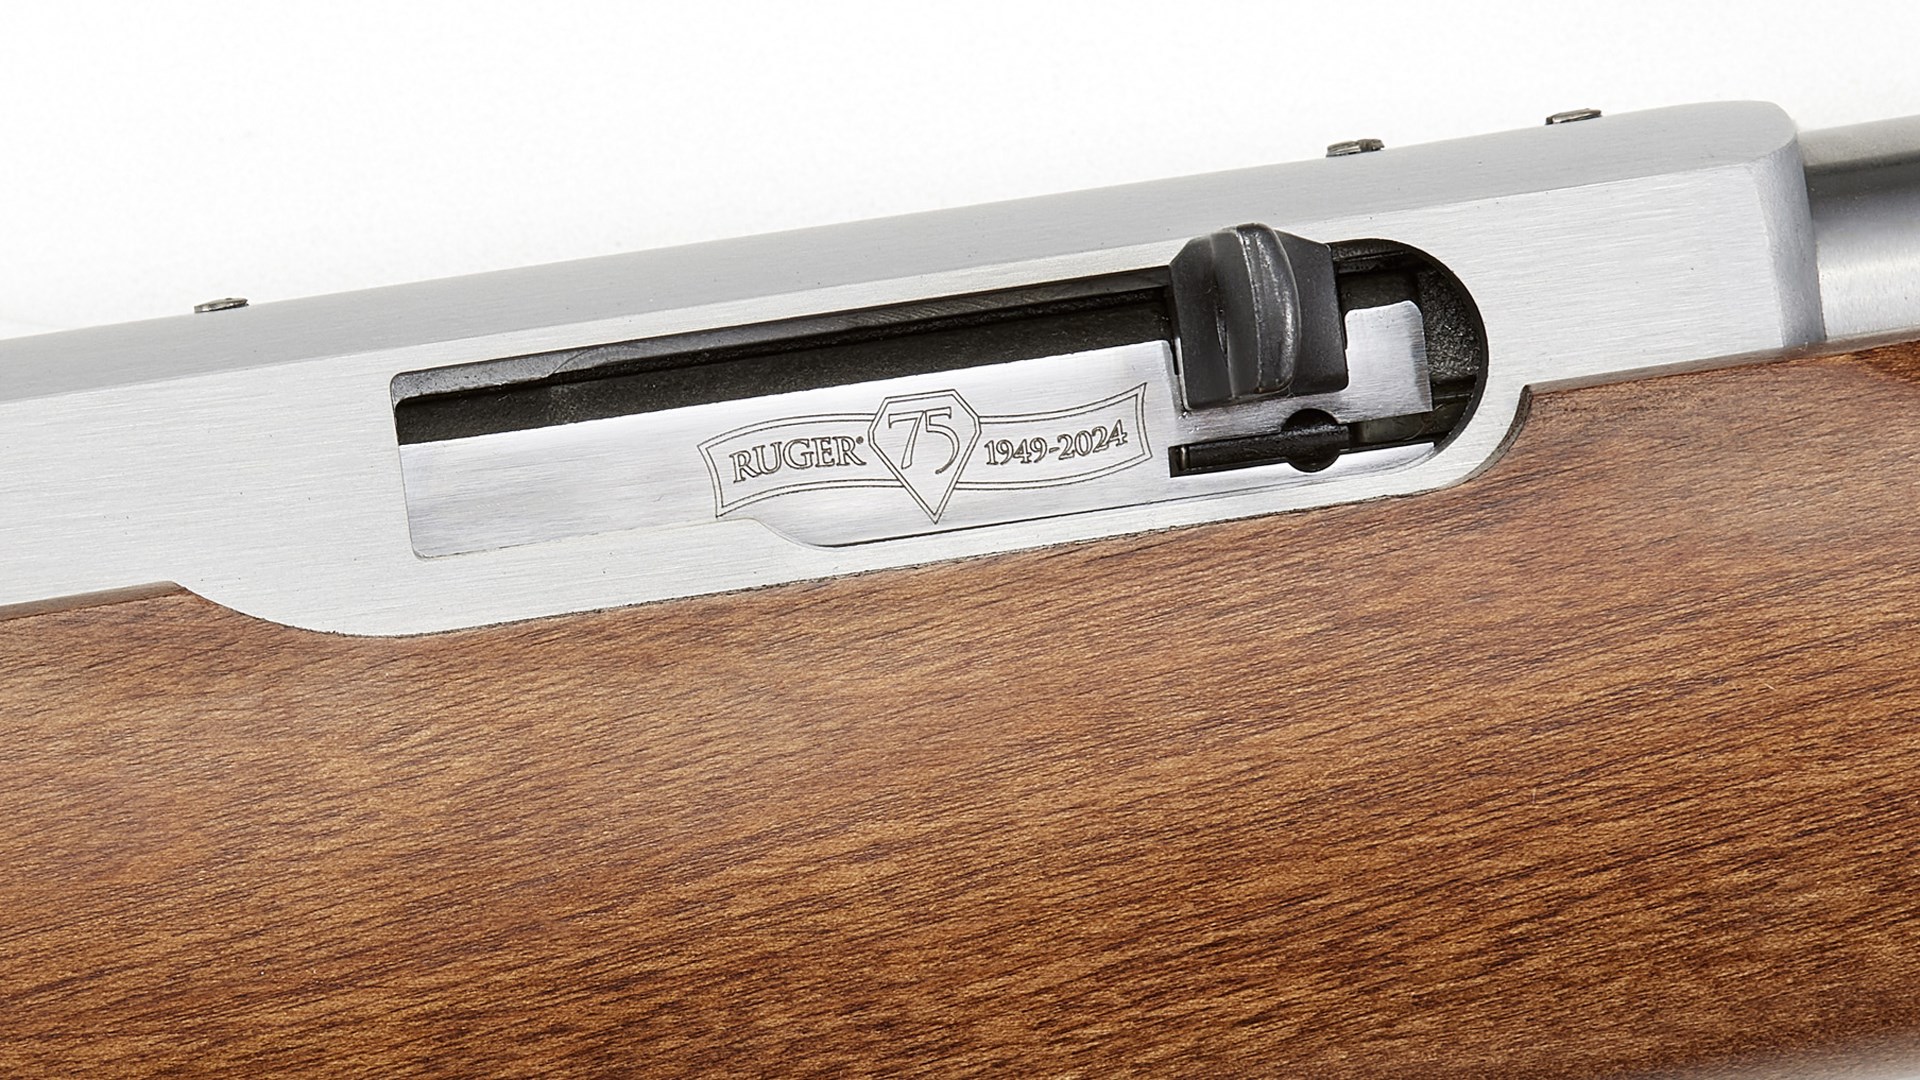 Ruger 75th anniversary engraving on the company's commemorative 10/22 bolt.